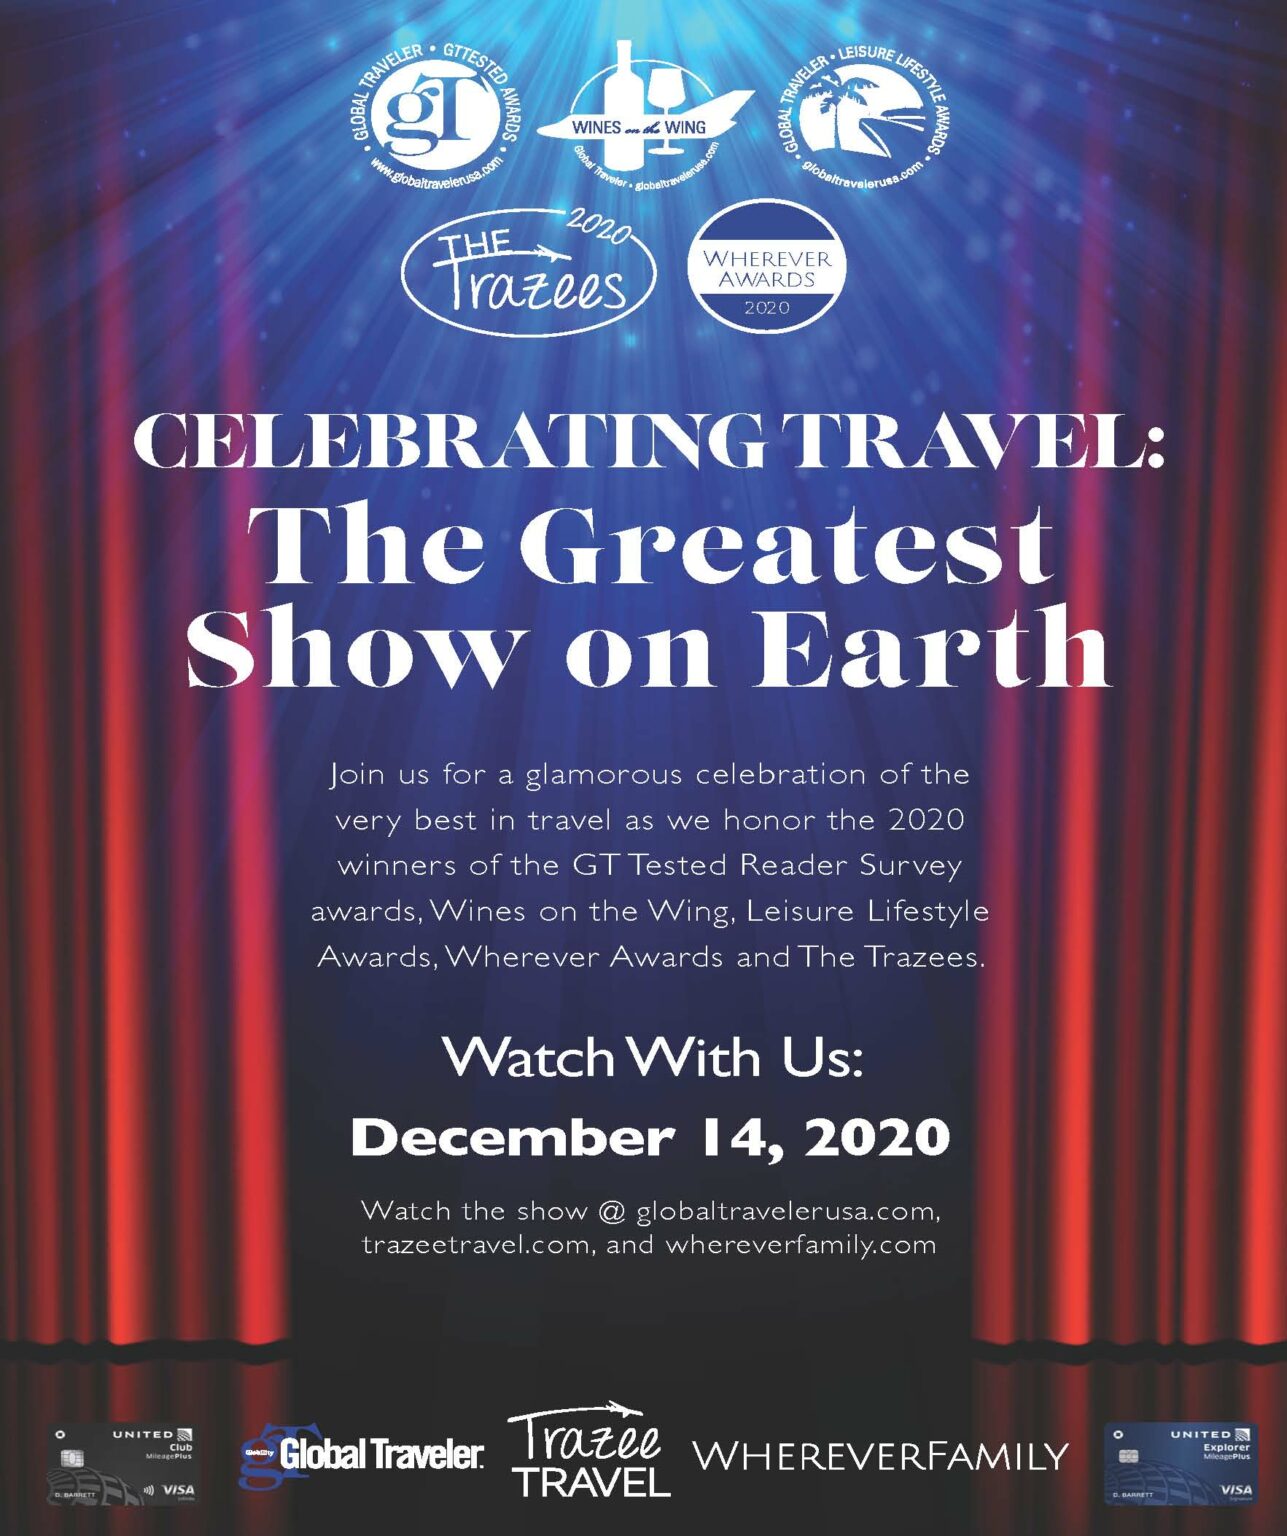 The Greatest Show on Earth Global Traveler